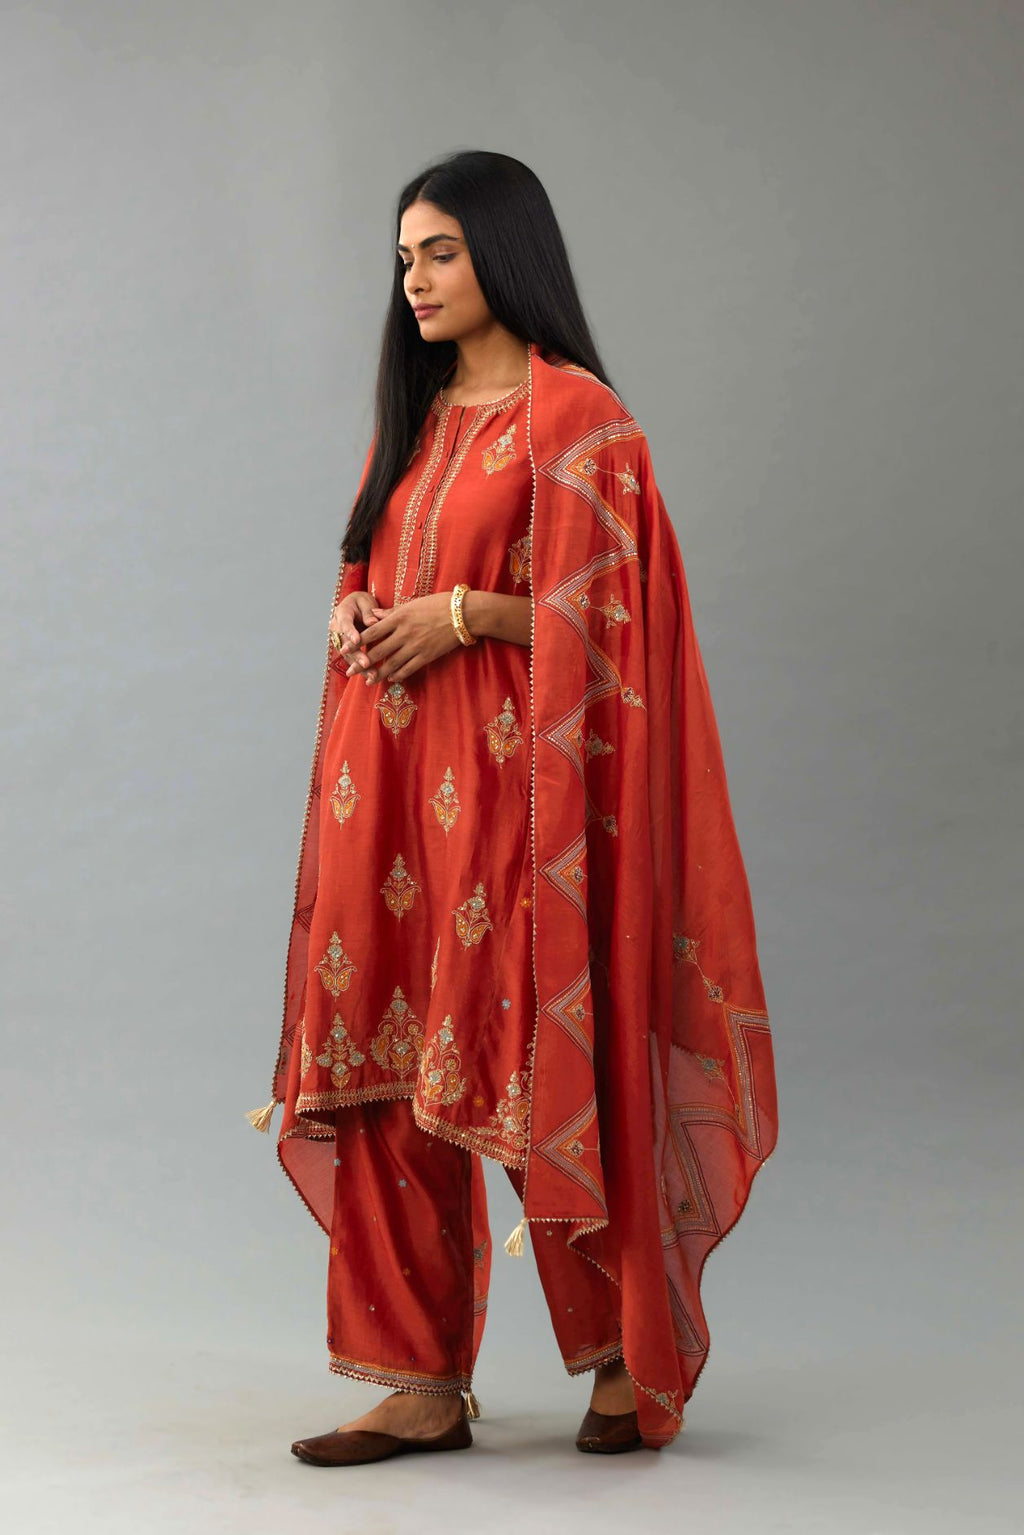 Rust Silk chanderi dupatta in chevron pattern embroidery with contrast silk thread and dori at the sides.